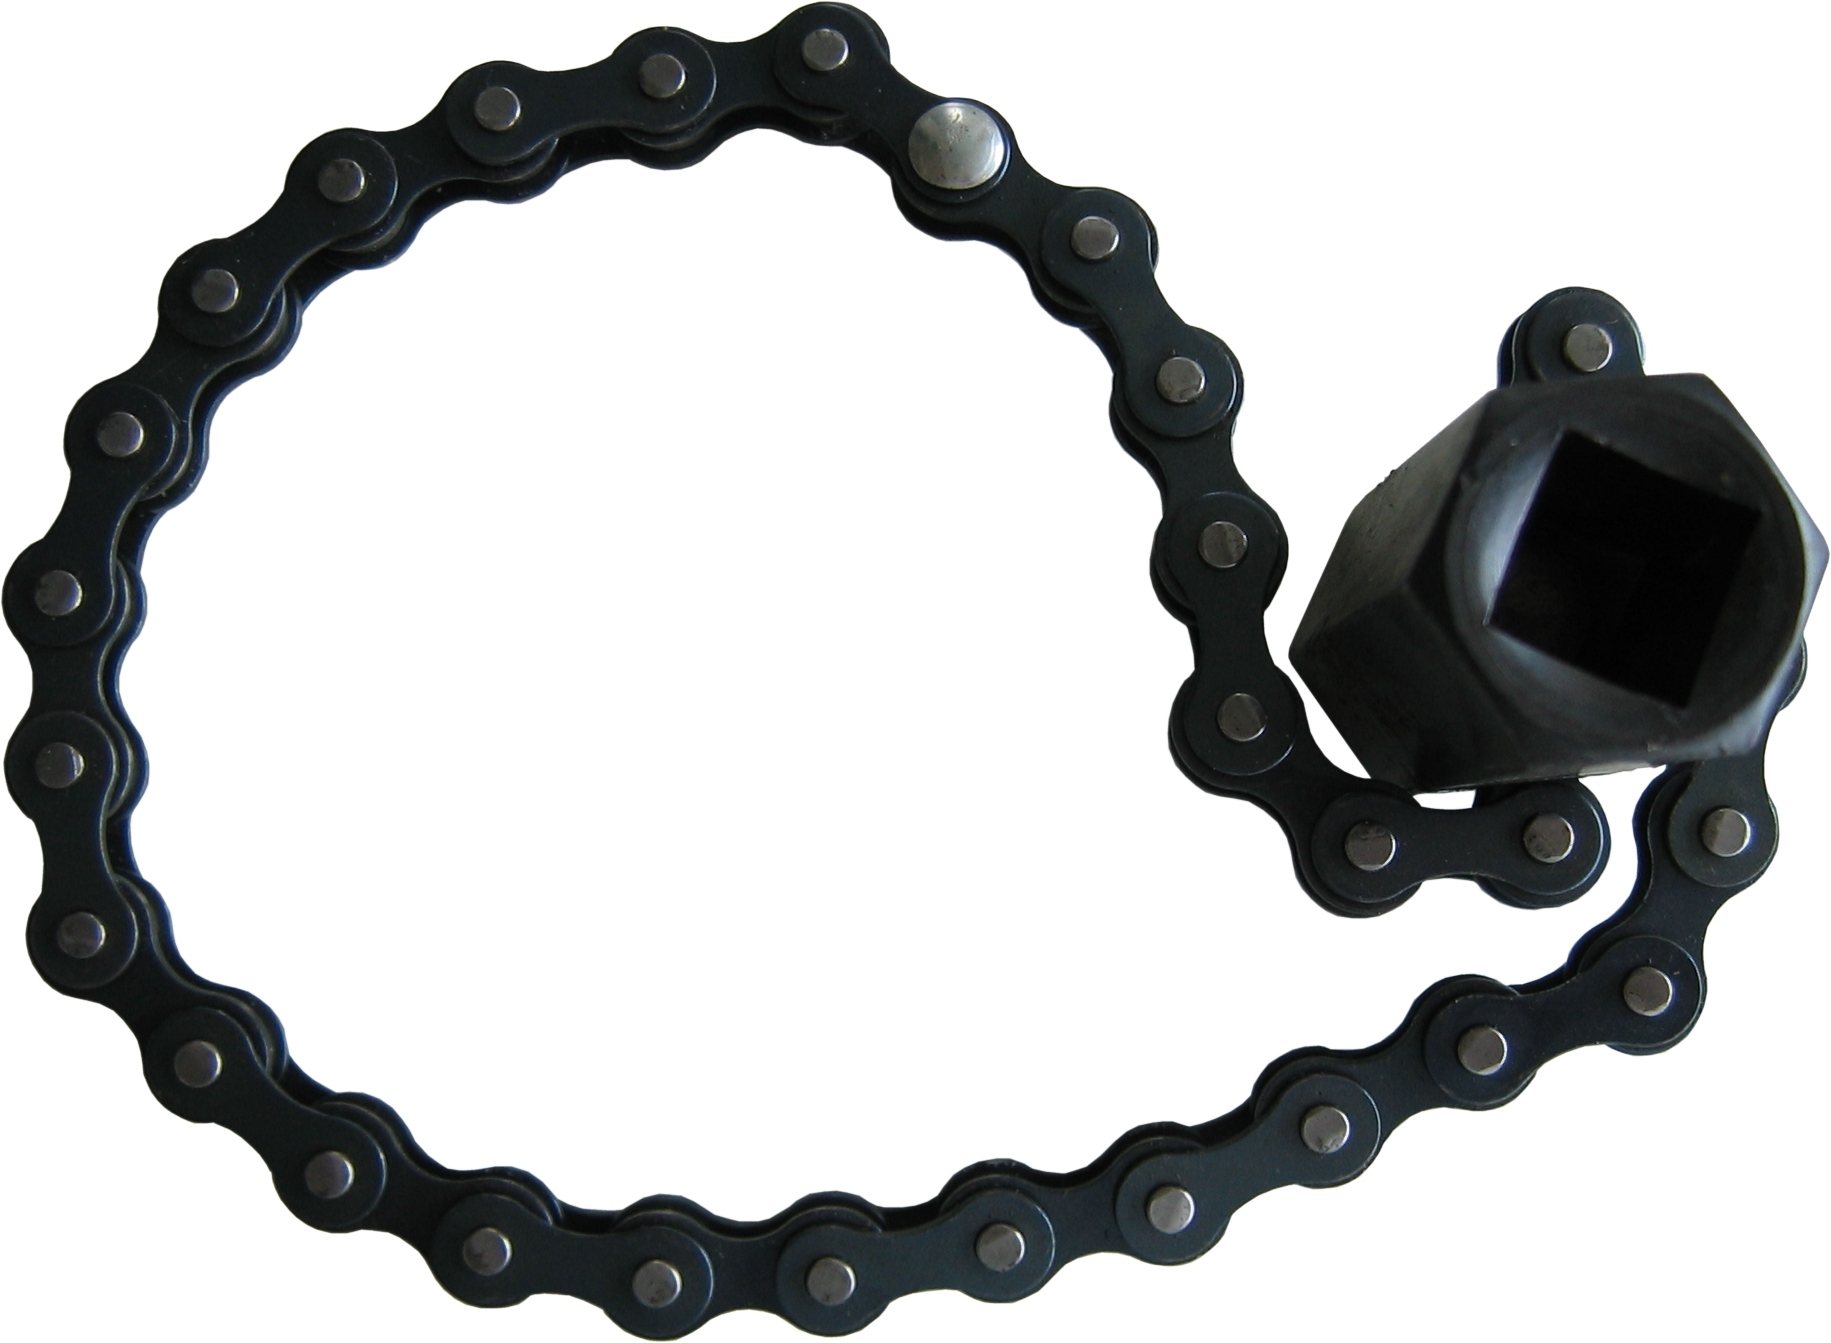 Laser 7858 Oil Filter Chain Wrench 60-170mm